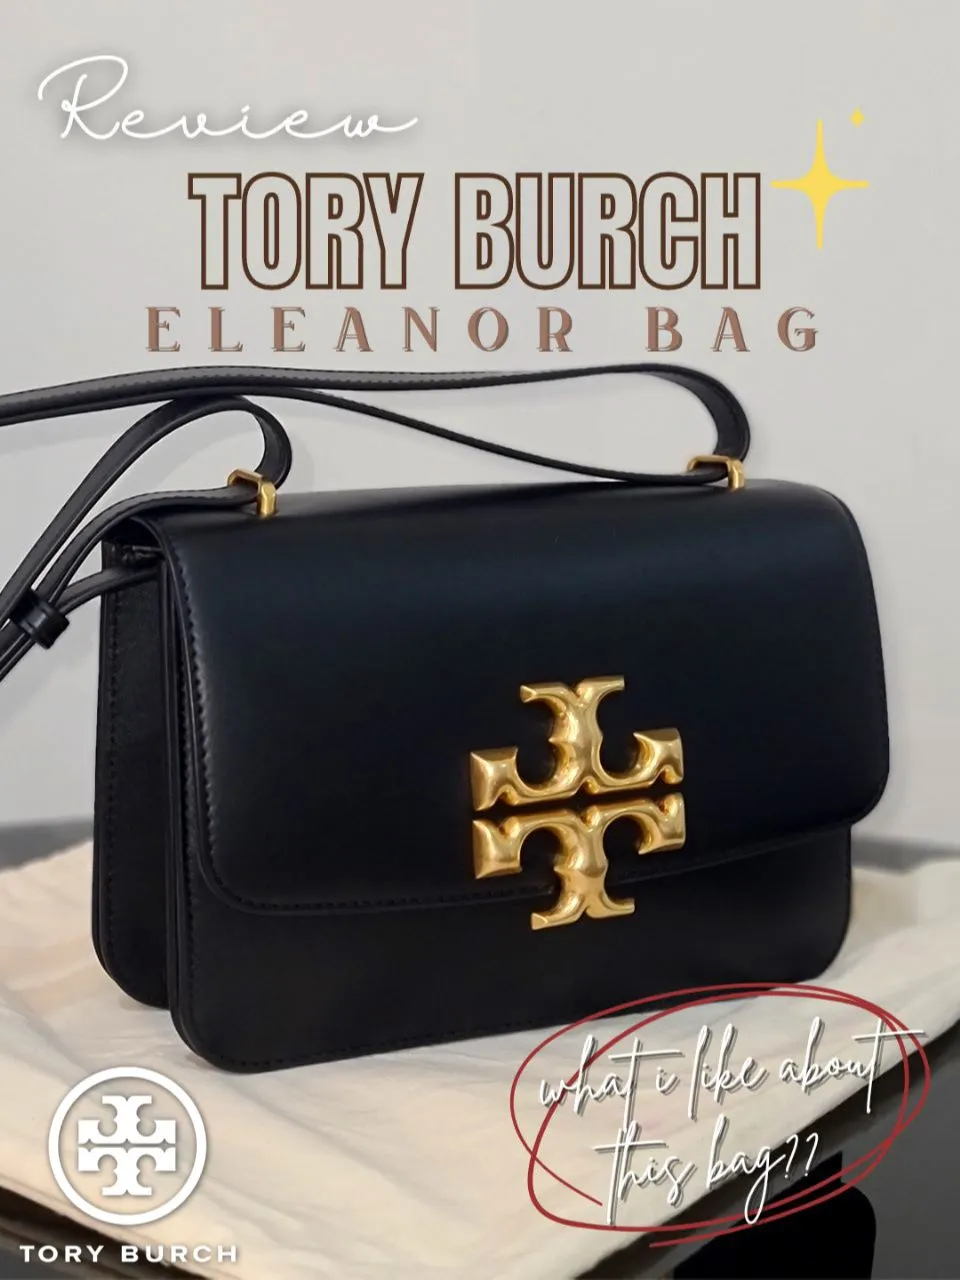 Tory Burch Eleanor Bag Review 💫🤎 | Article posted by Vivien Osk | Lemon8